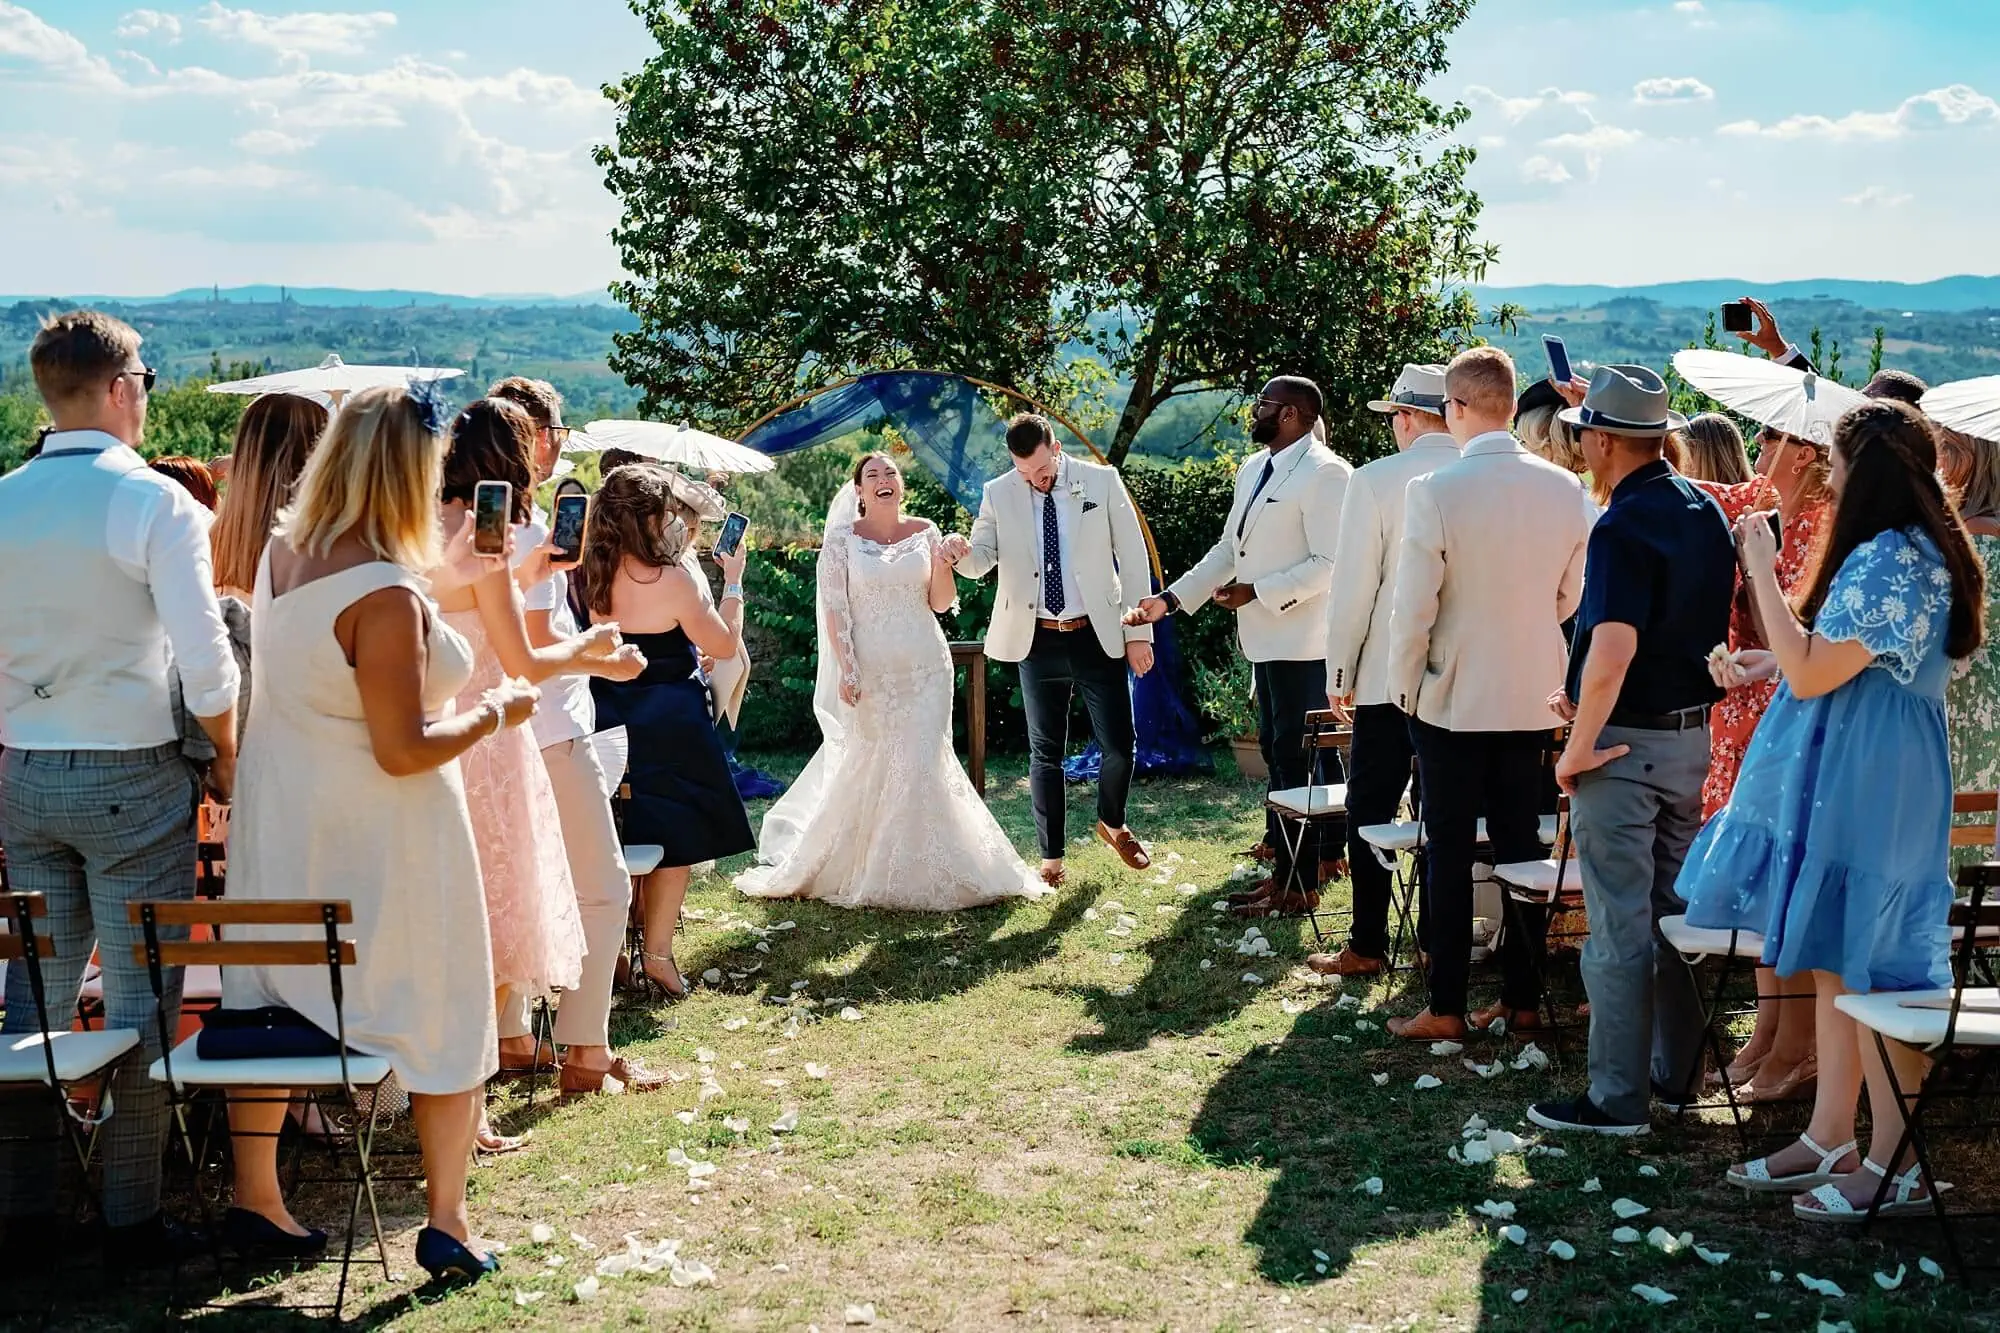 the recessional in Italy